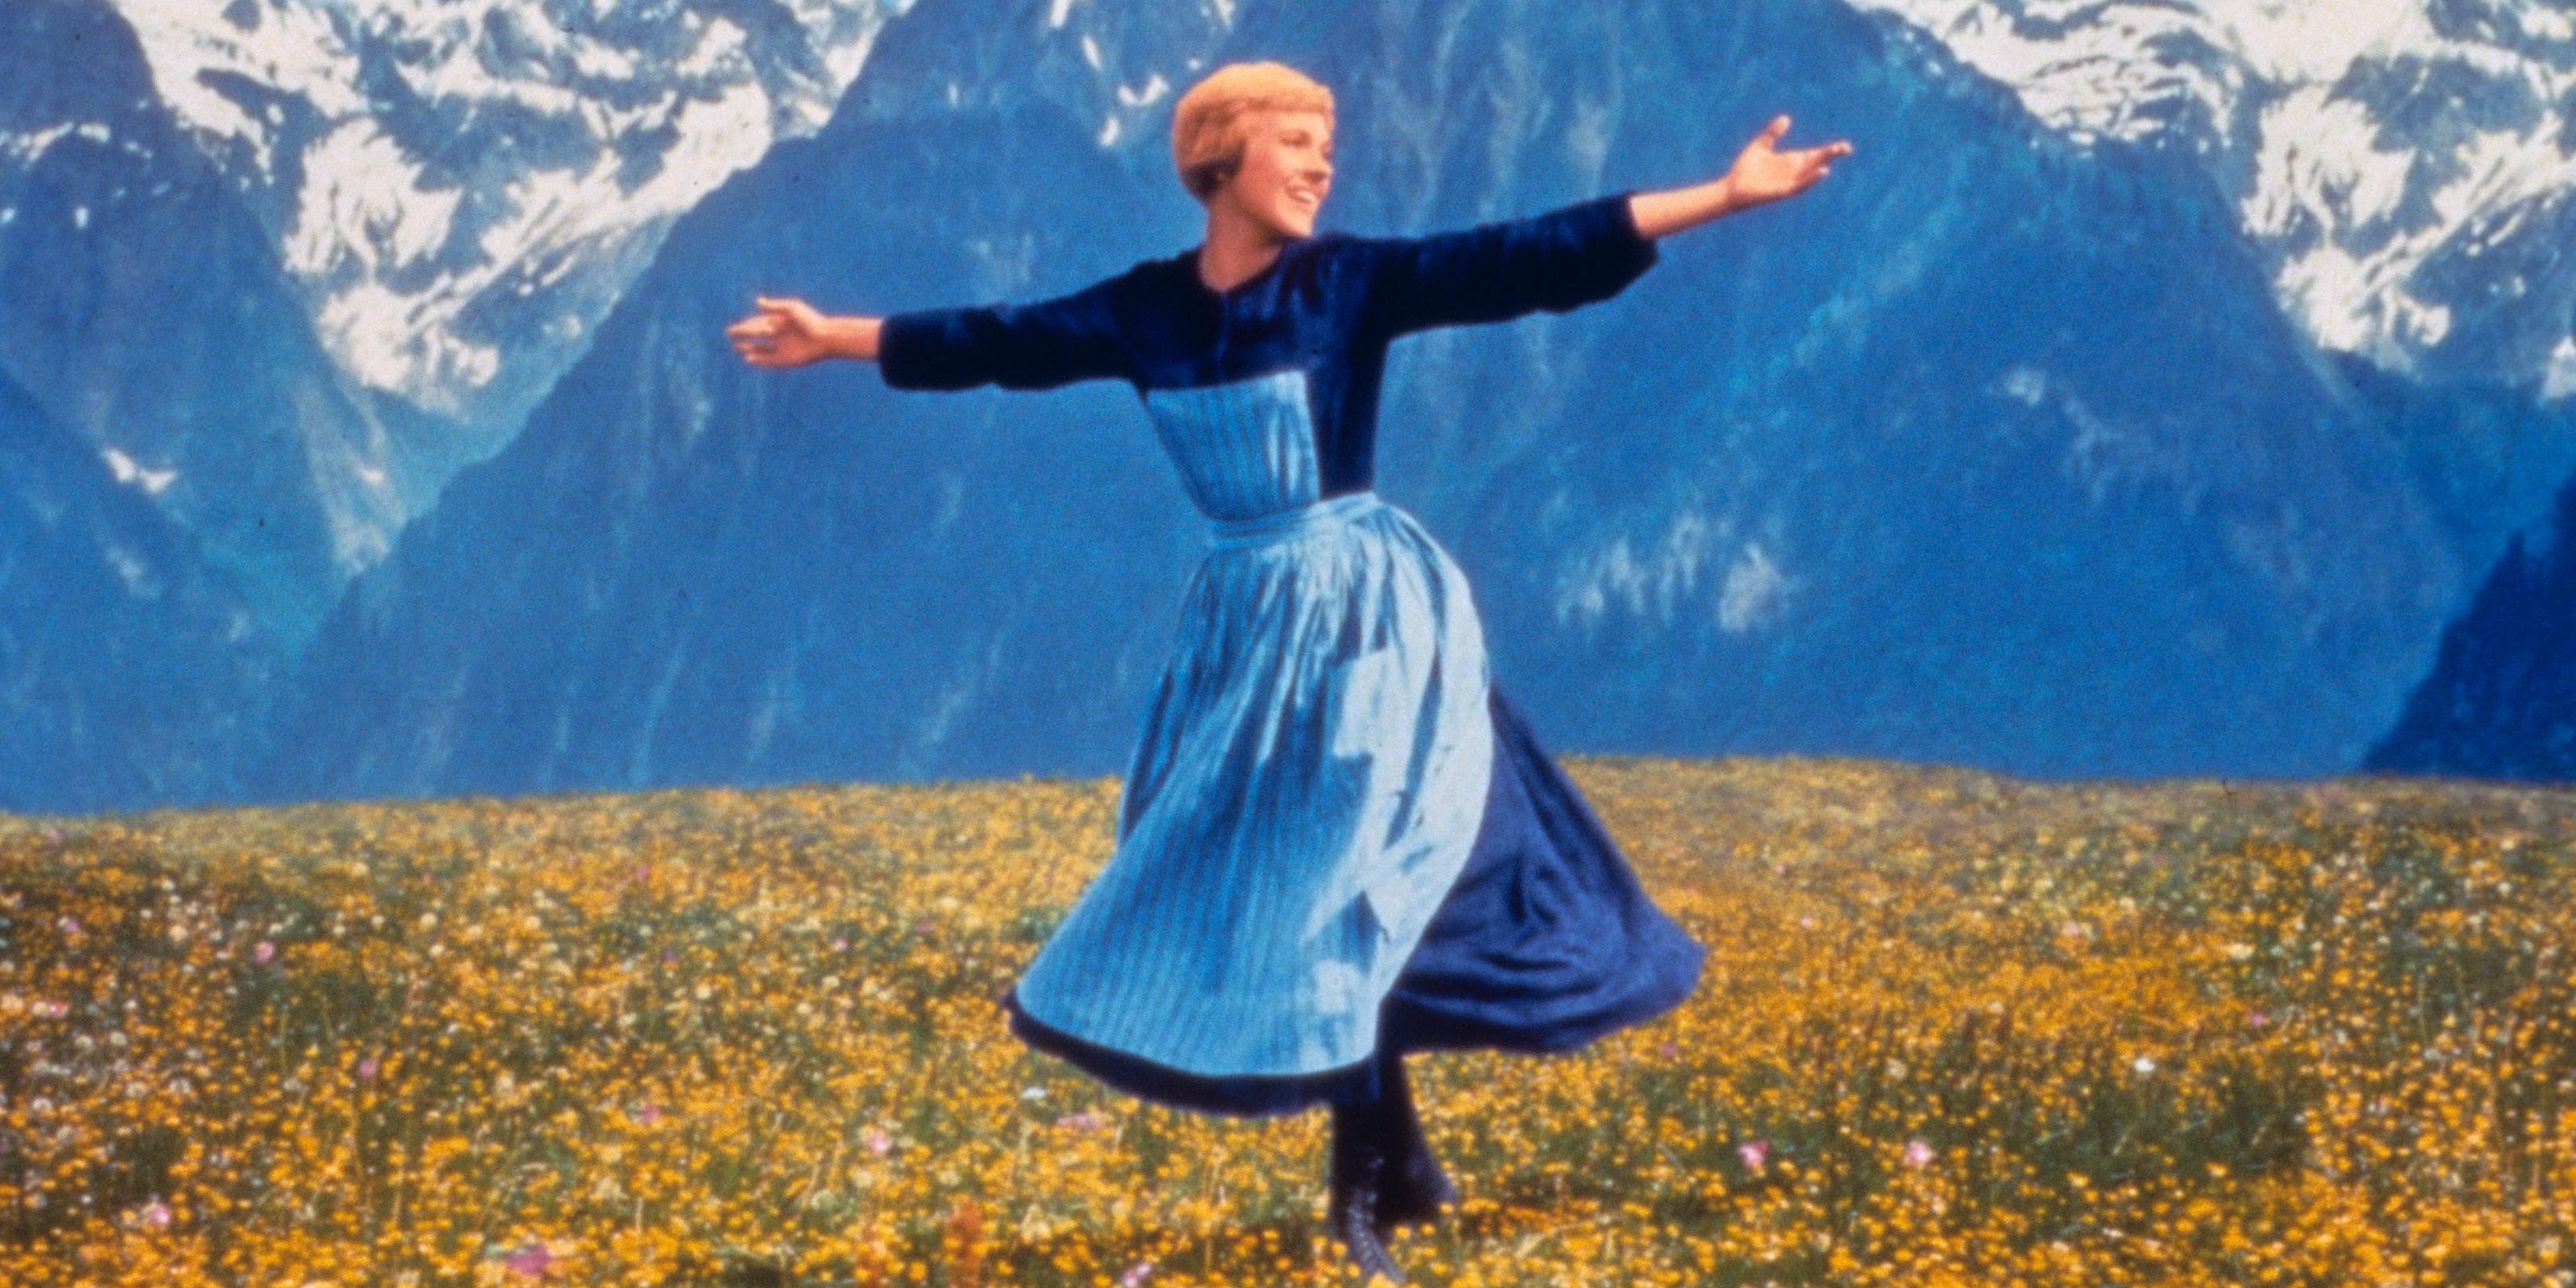 Maria singing the title song of The Sound of Music